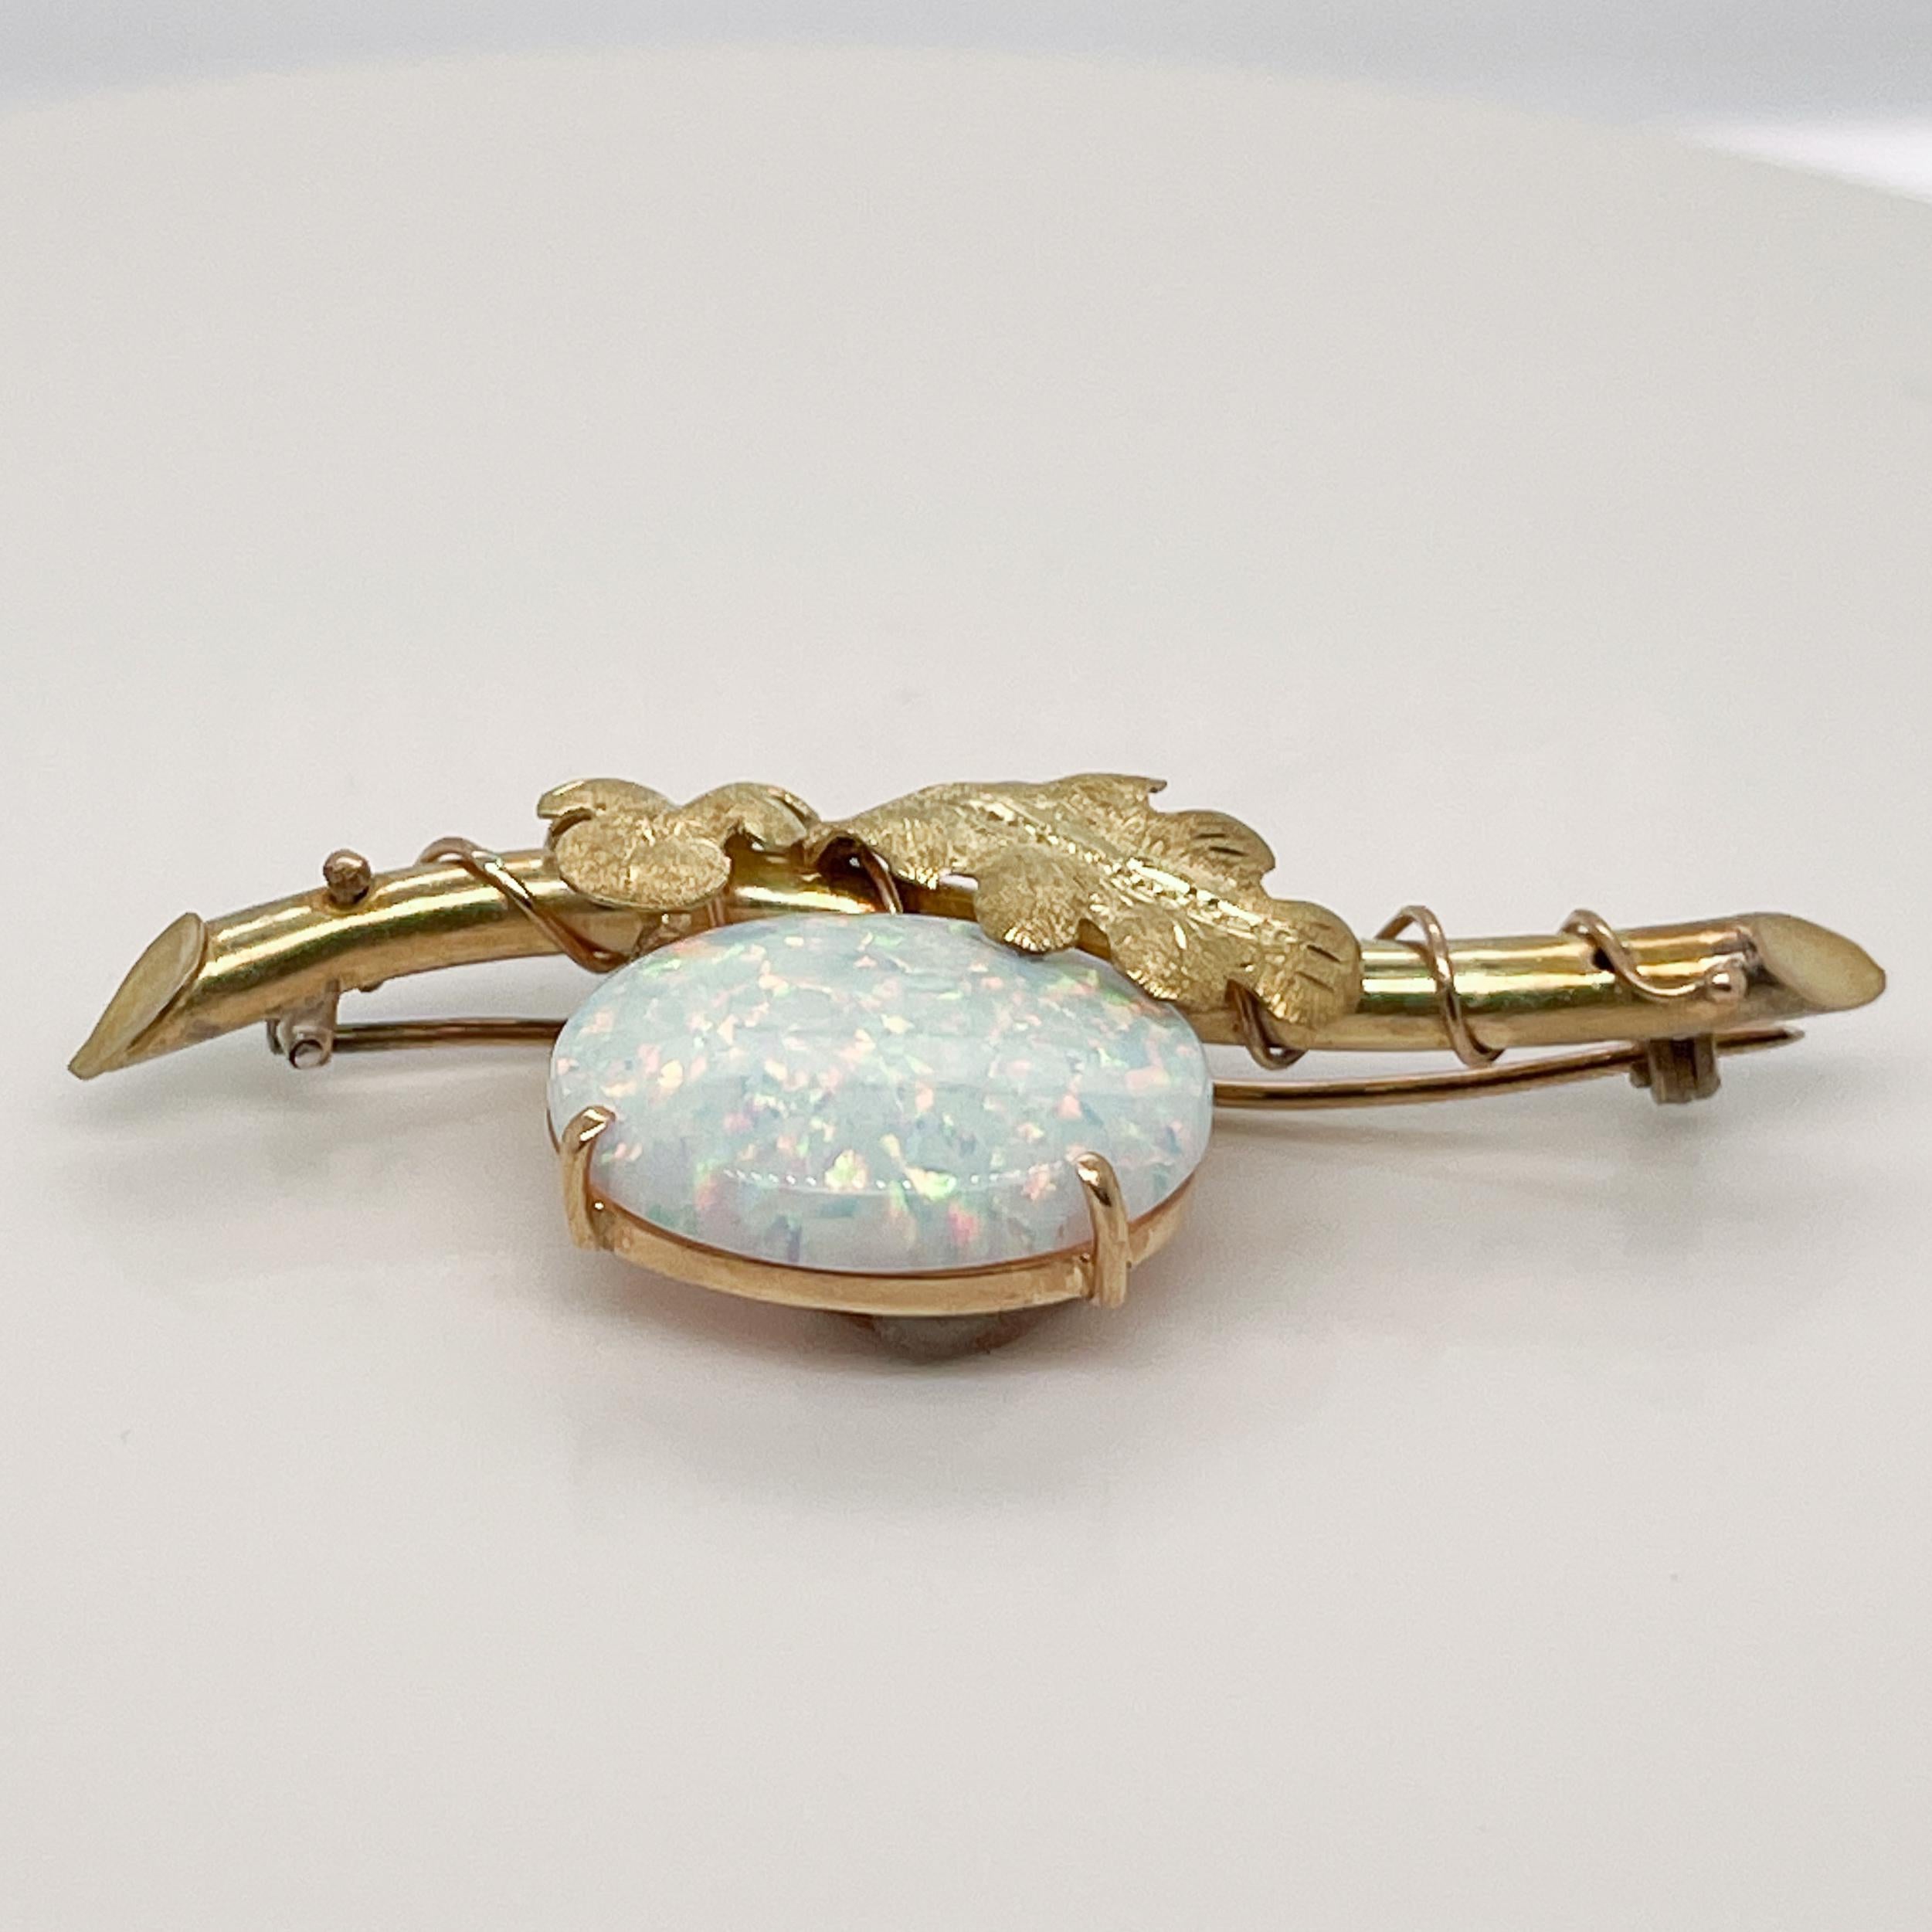 Women's or Men's Edwardian Style 18 Karat Gold Brooch or Pin with a Opal Cabochon For Sale